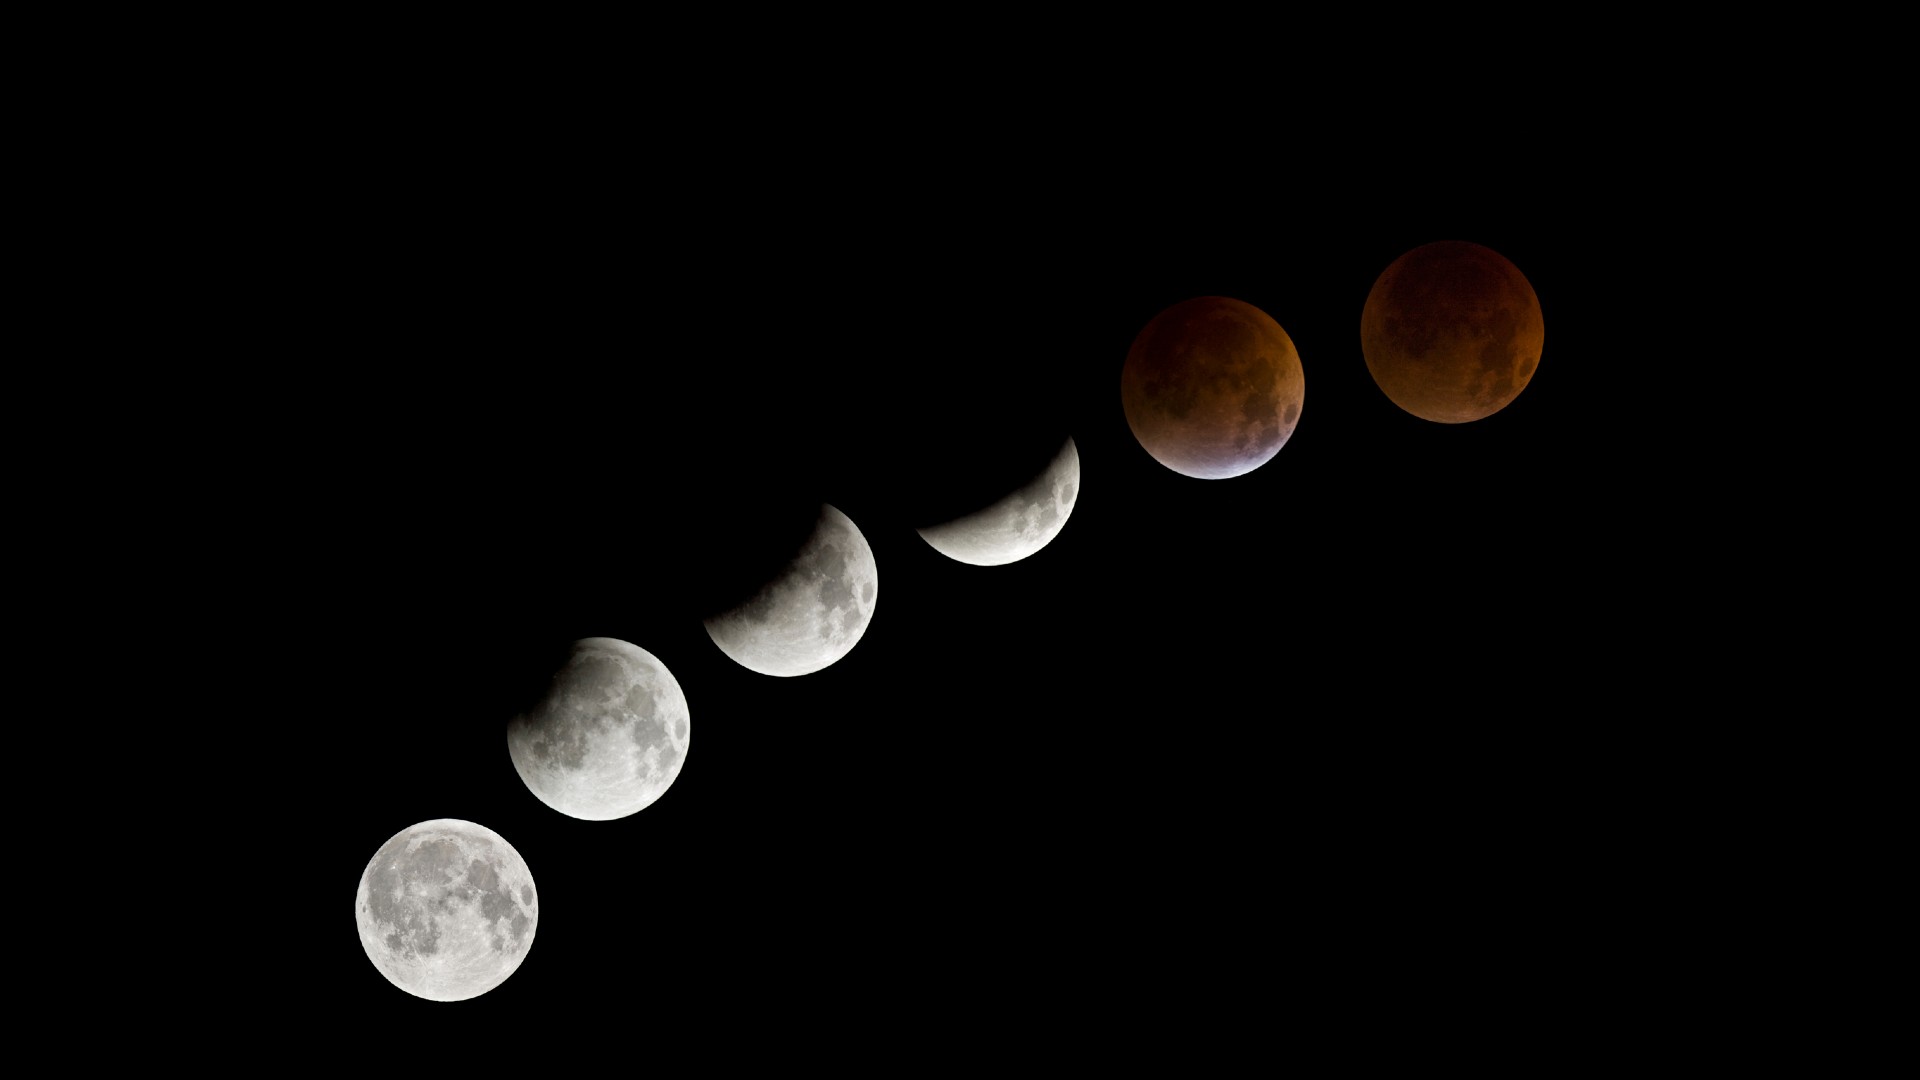 Timeout of a full lunar eclipse.